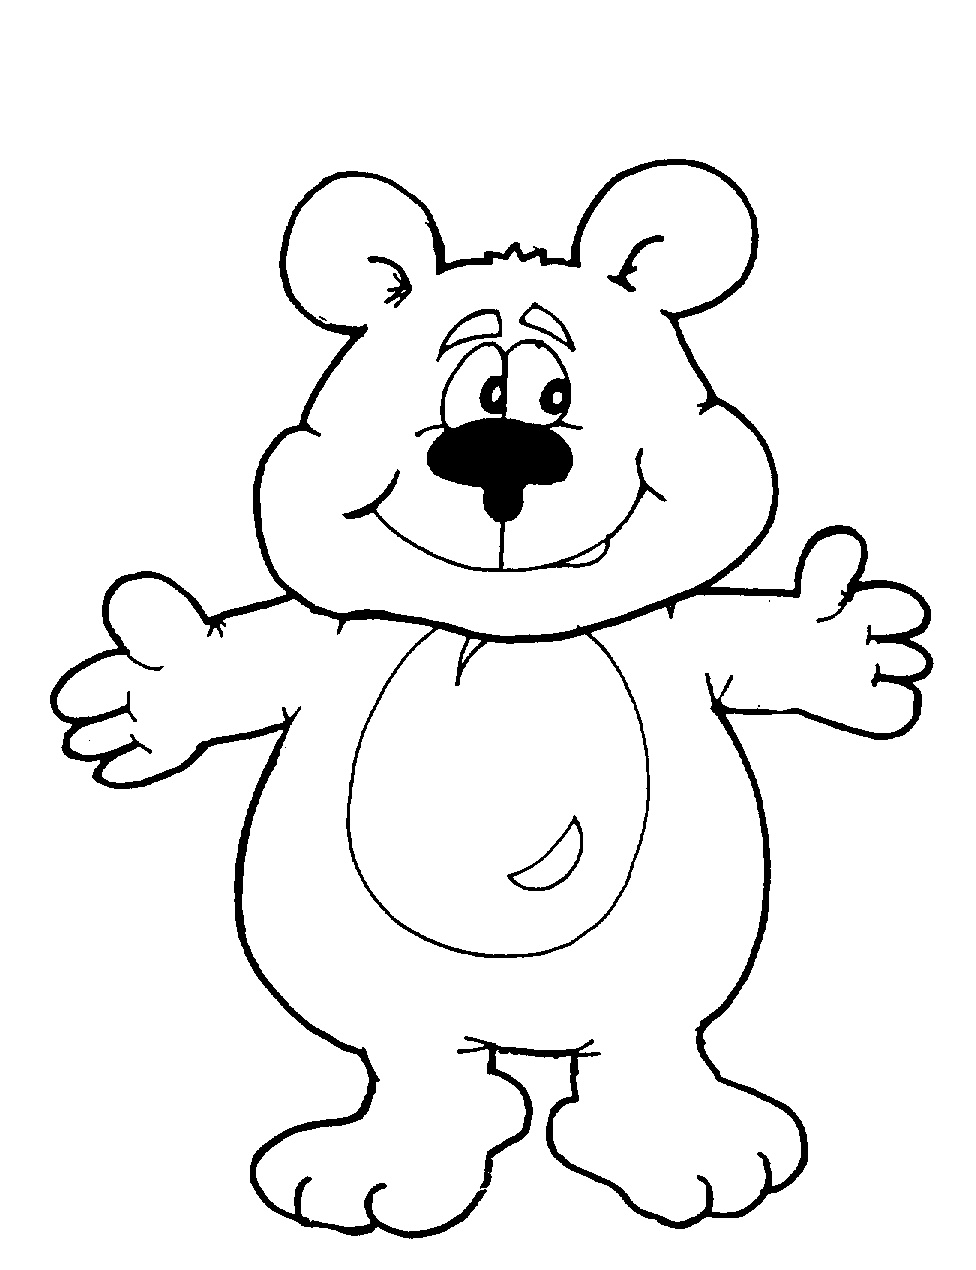 Images For > Cartoon Teddy Bear Drawing